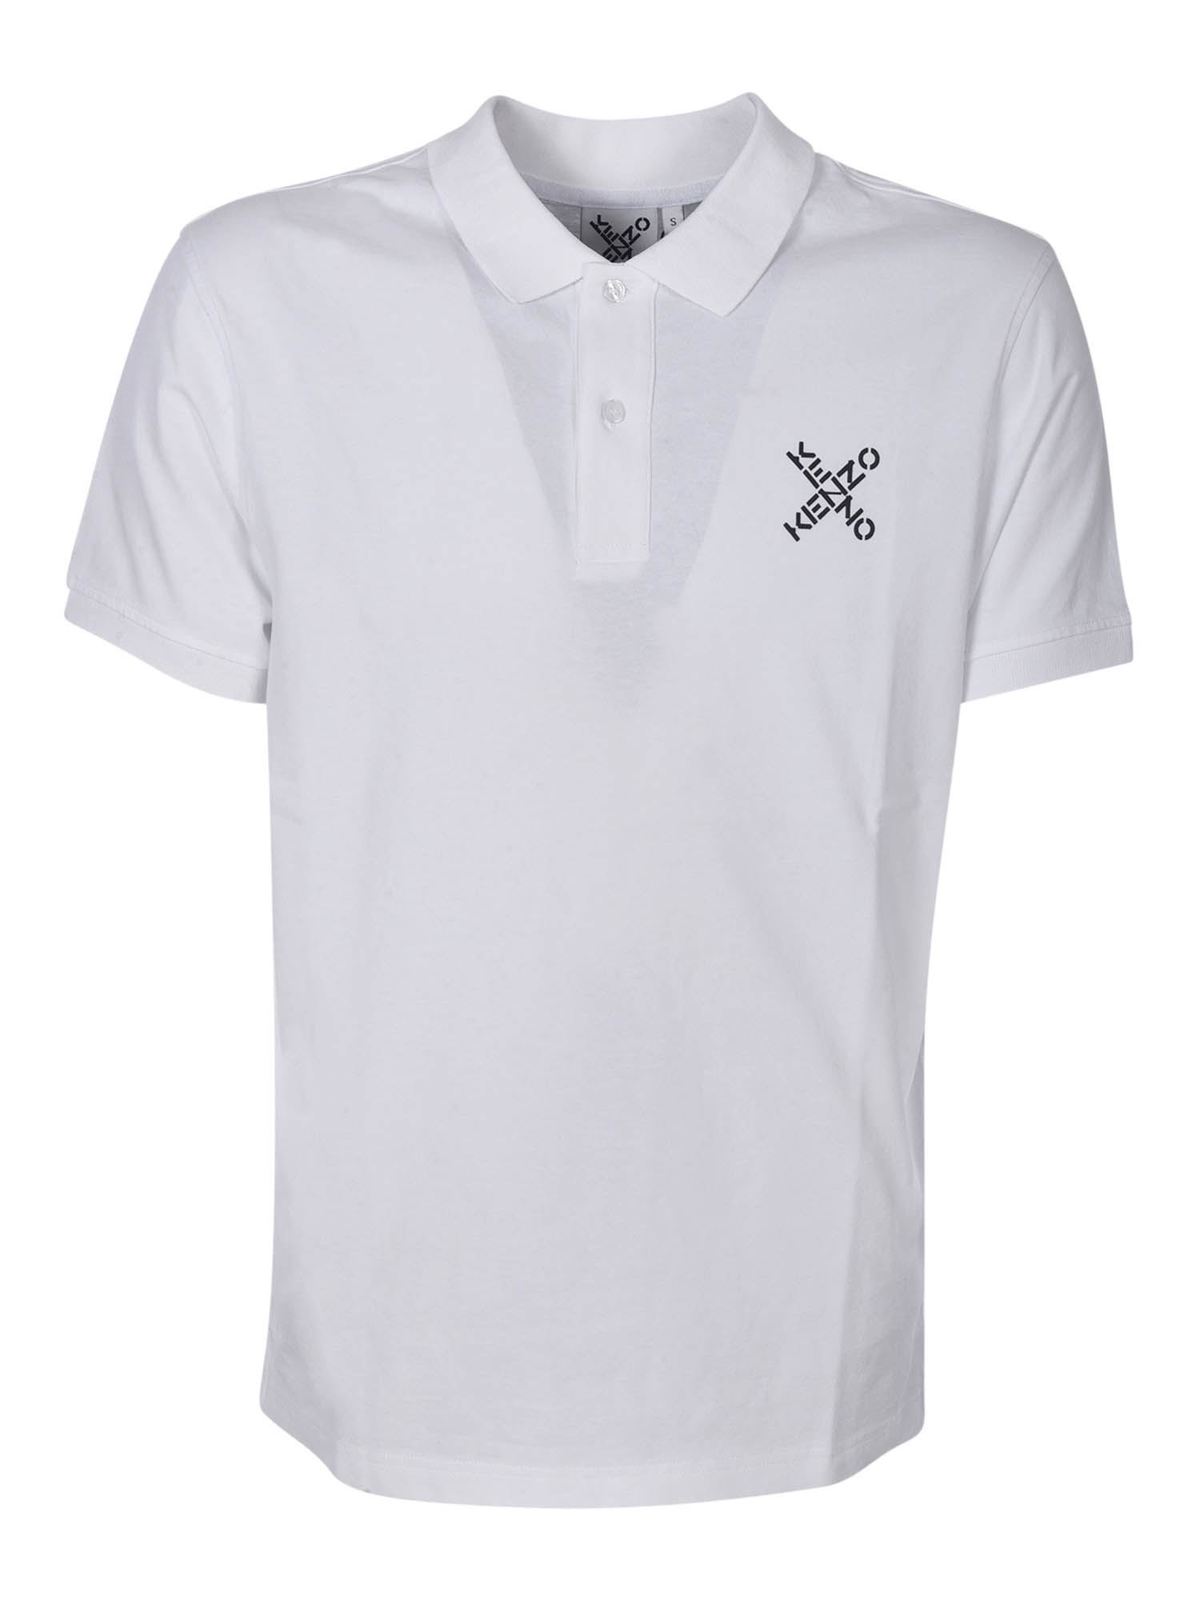 Polo shirt in featuring with Kenzo logo 